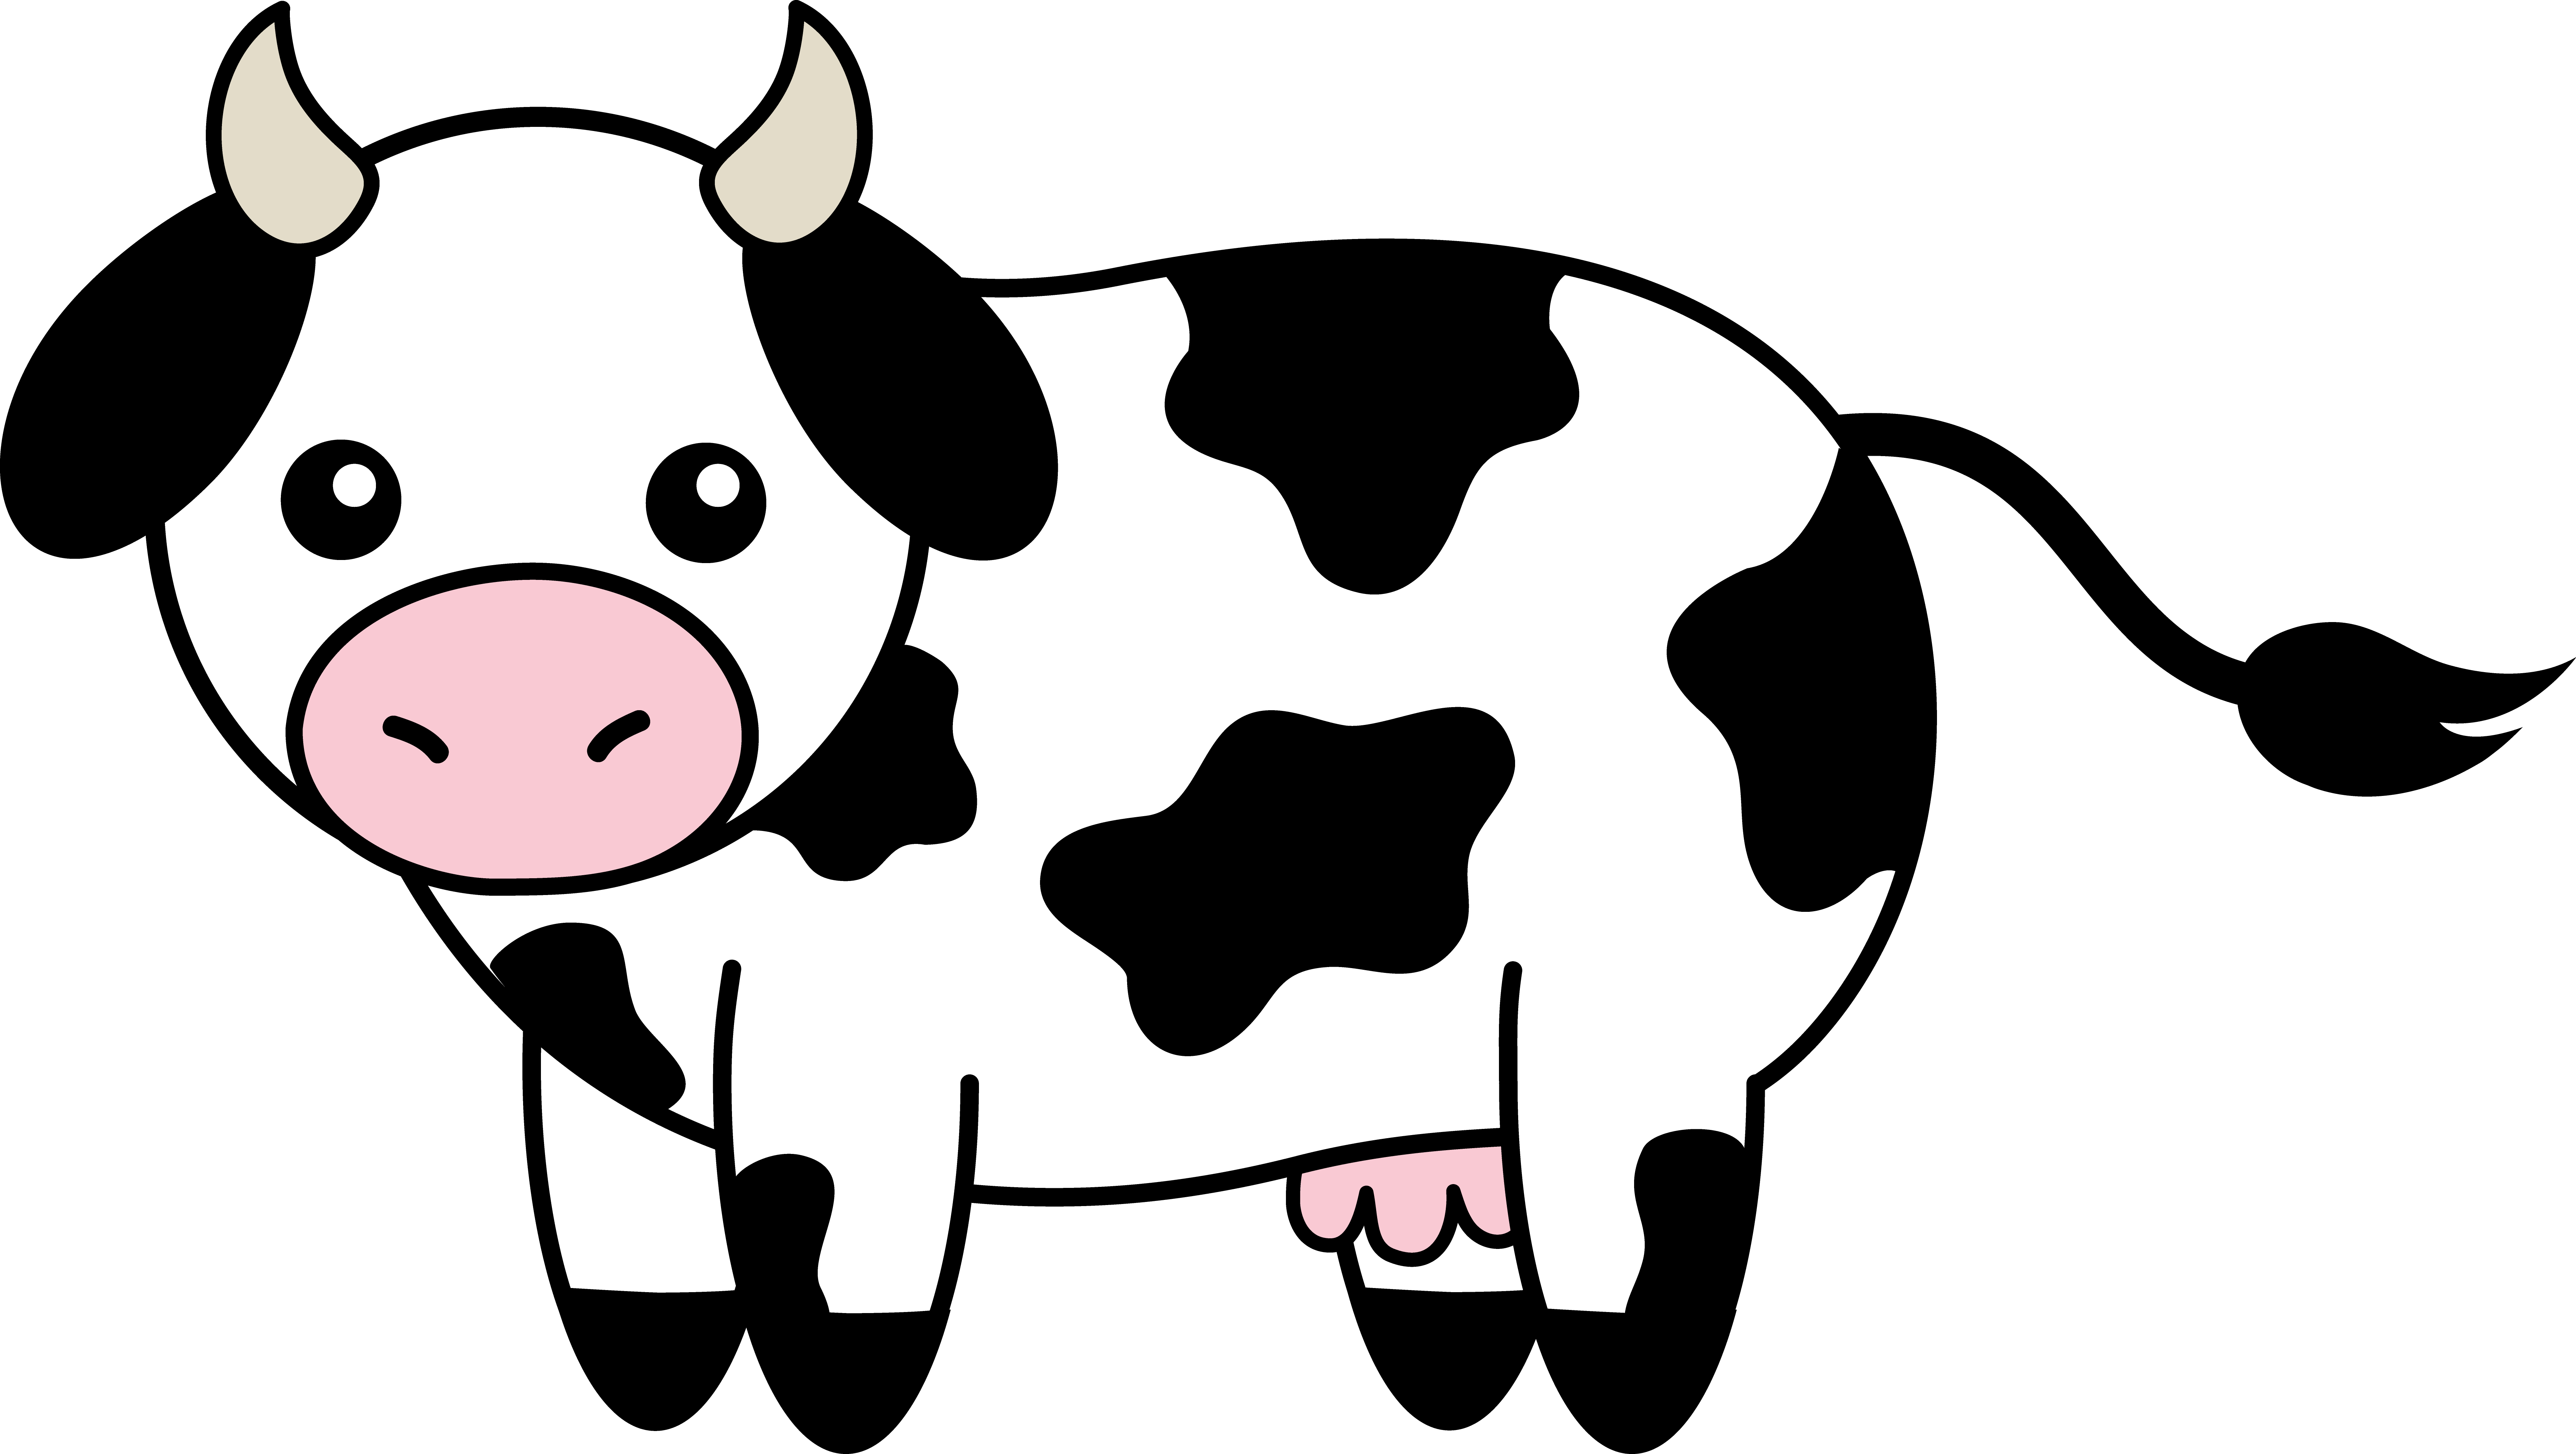 cow cdr clipart - photo #34